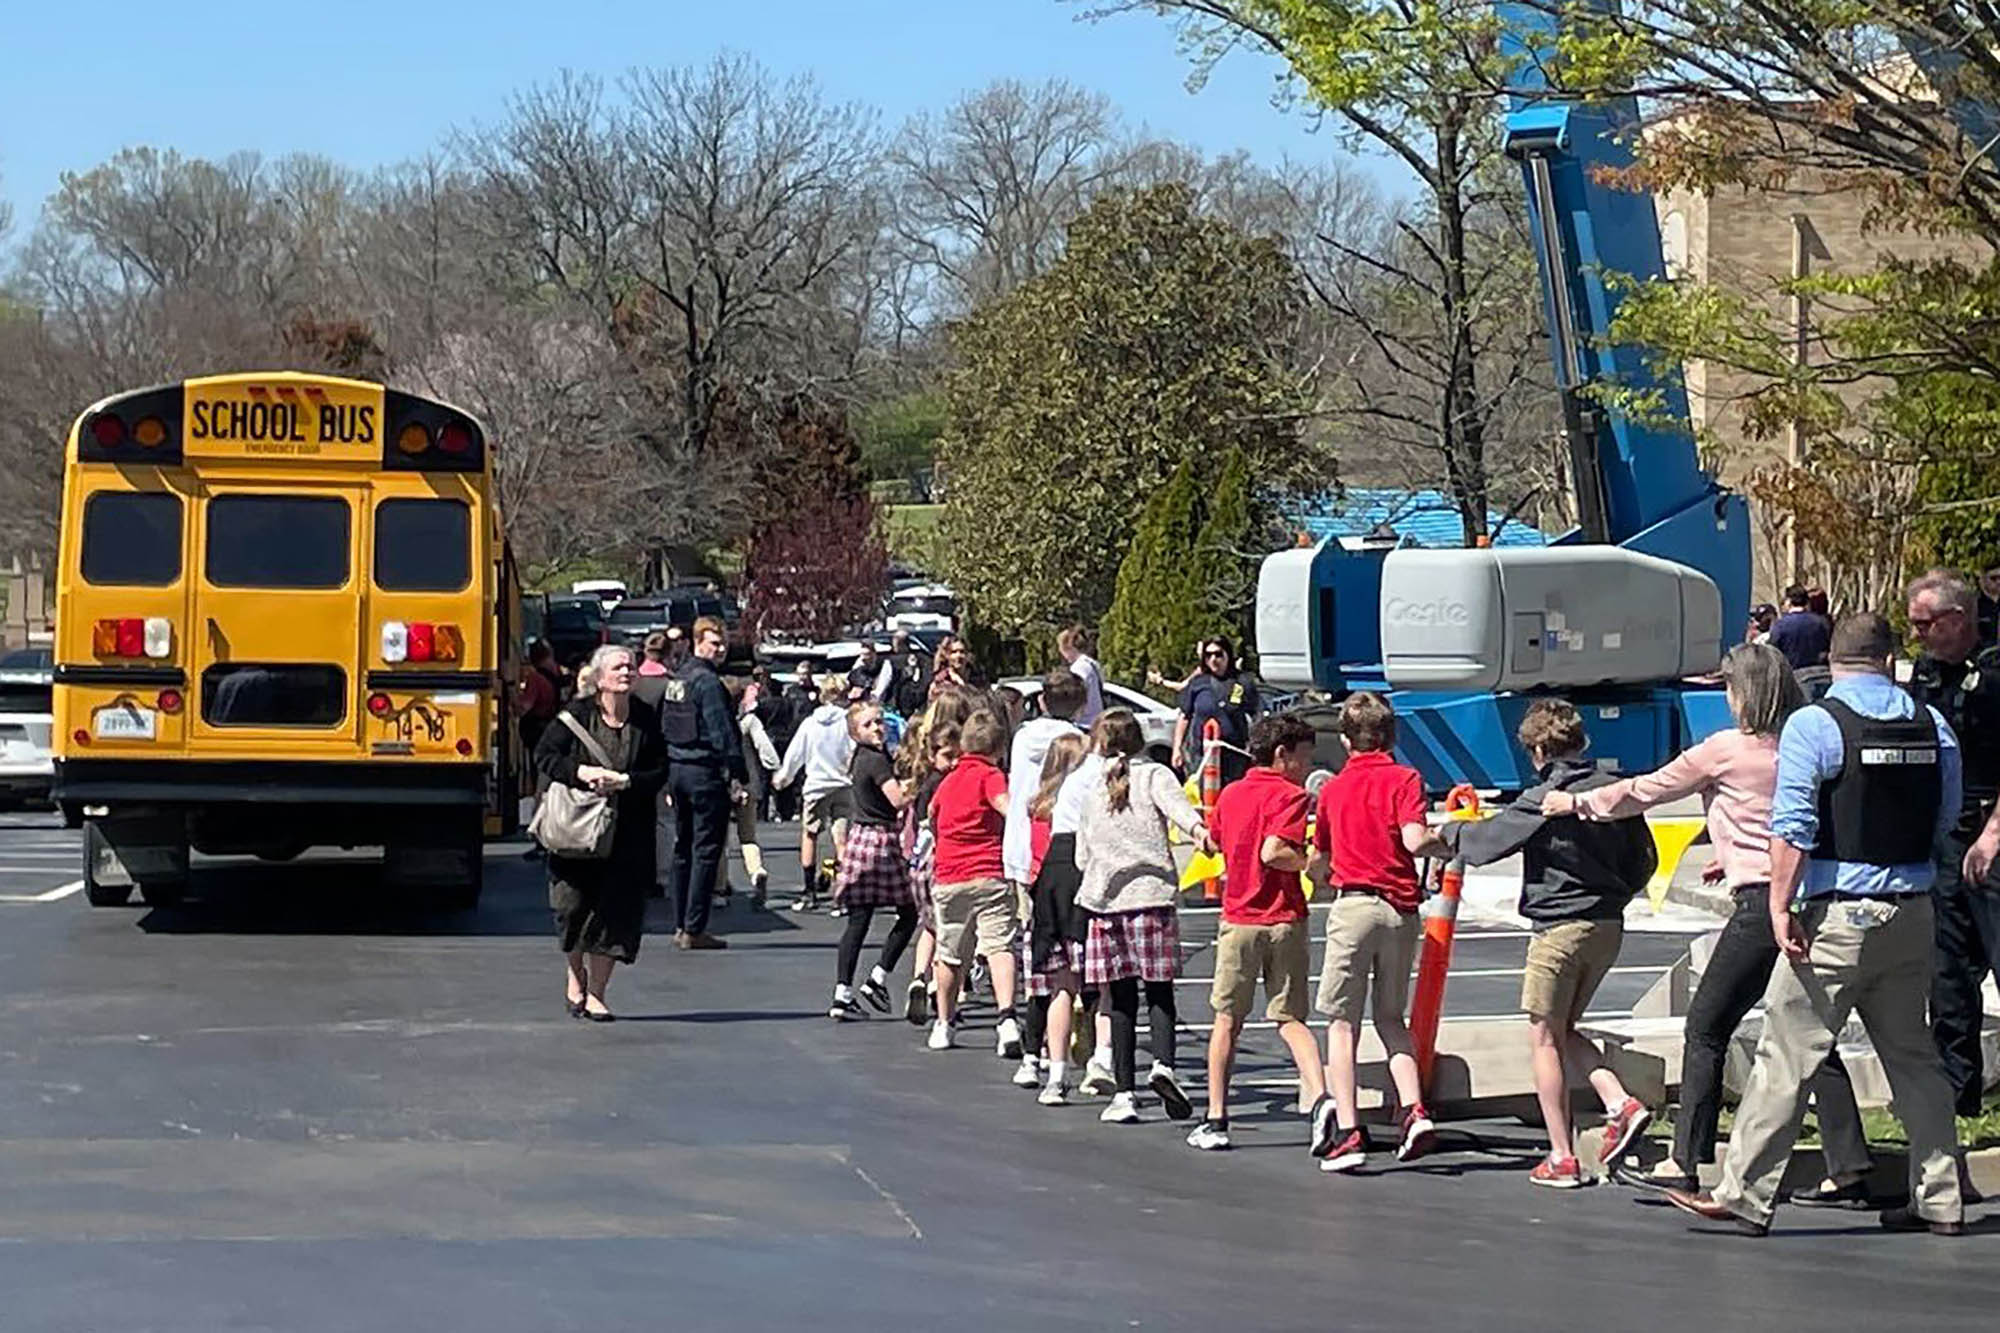 Children from the Covenant School hold hands as they are taken to a reunification site following a deadly shooting at their school in Nashville, Tennessee, on Monday, March 27.